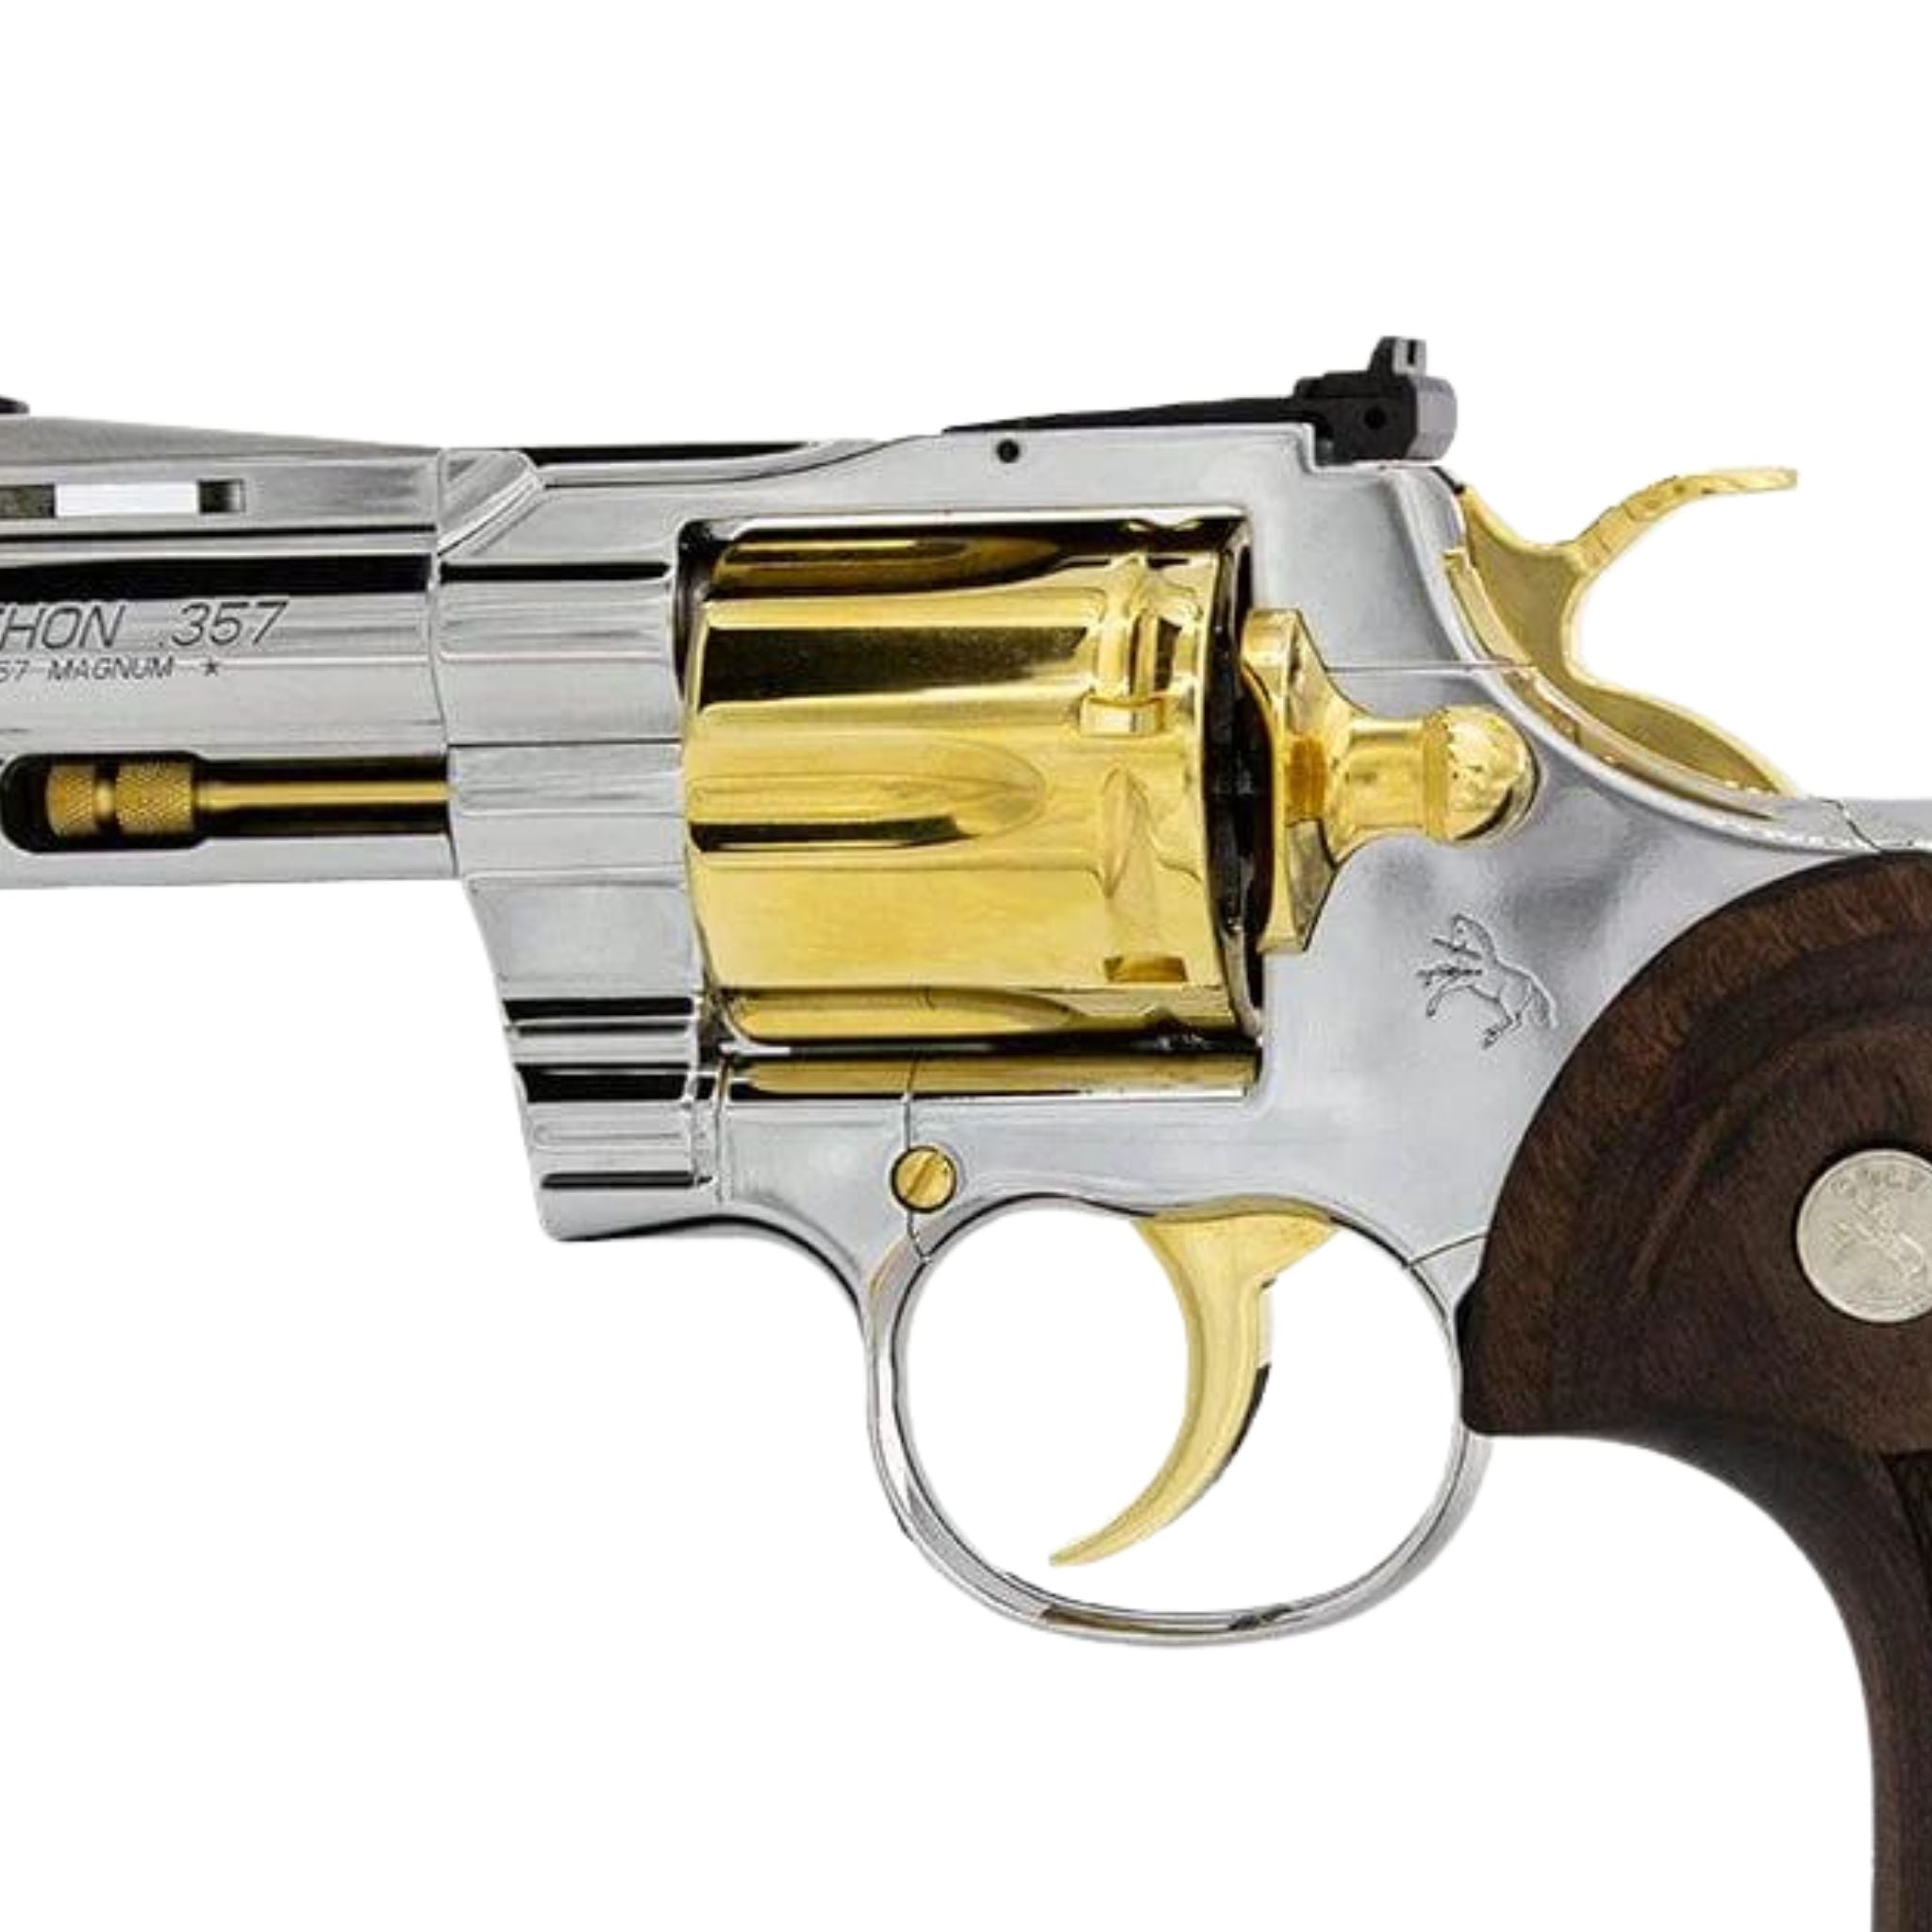 Colt Python,  3" .357 Magnum/38 Special, High Polished Stainless Steel with 24 karat Gold Accents SKU: 6705449730150, Gold Gun, gold firearm